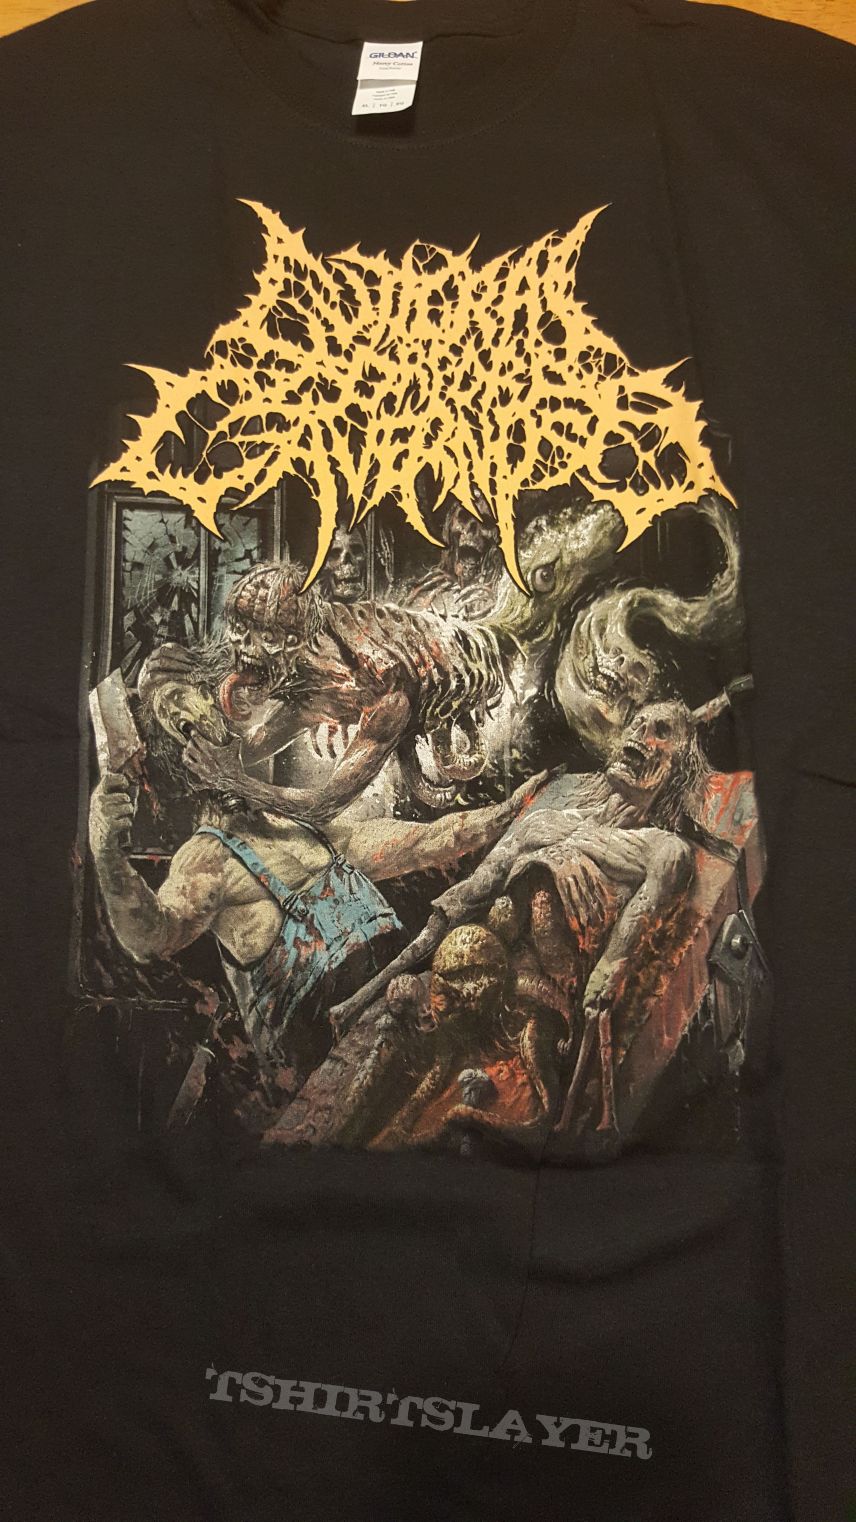 Guttural Corpora Cavernosa - You Should Have Died When I Killed You - SS - XL